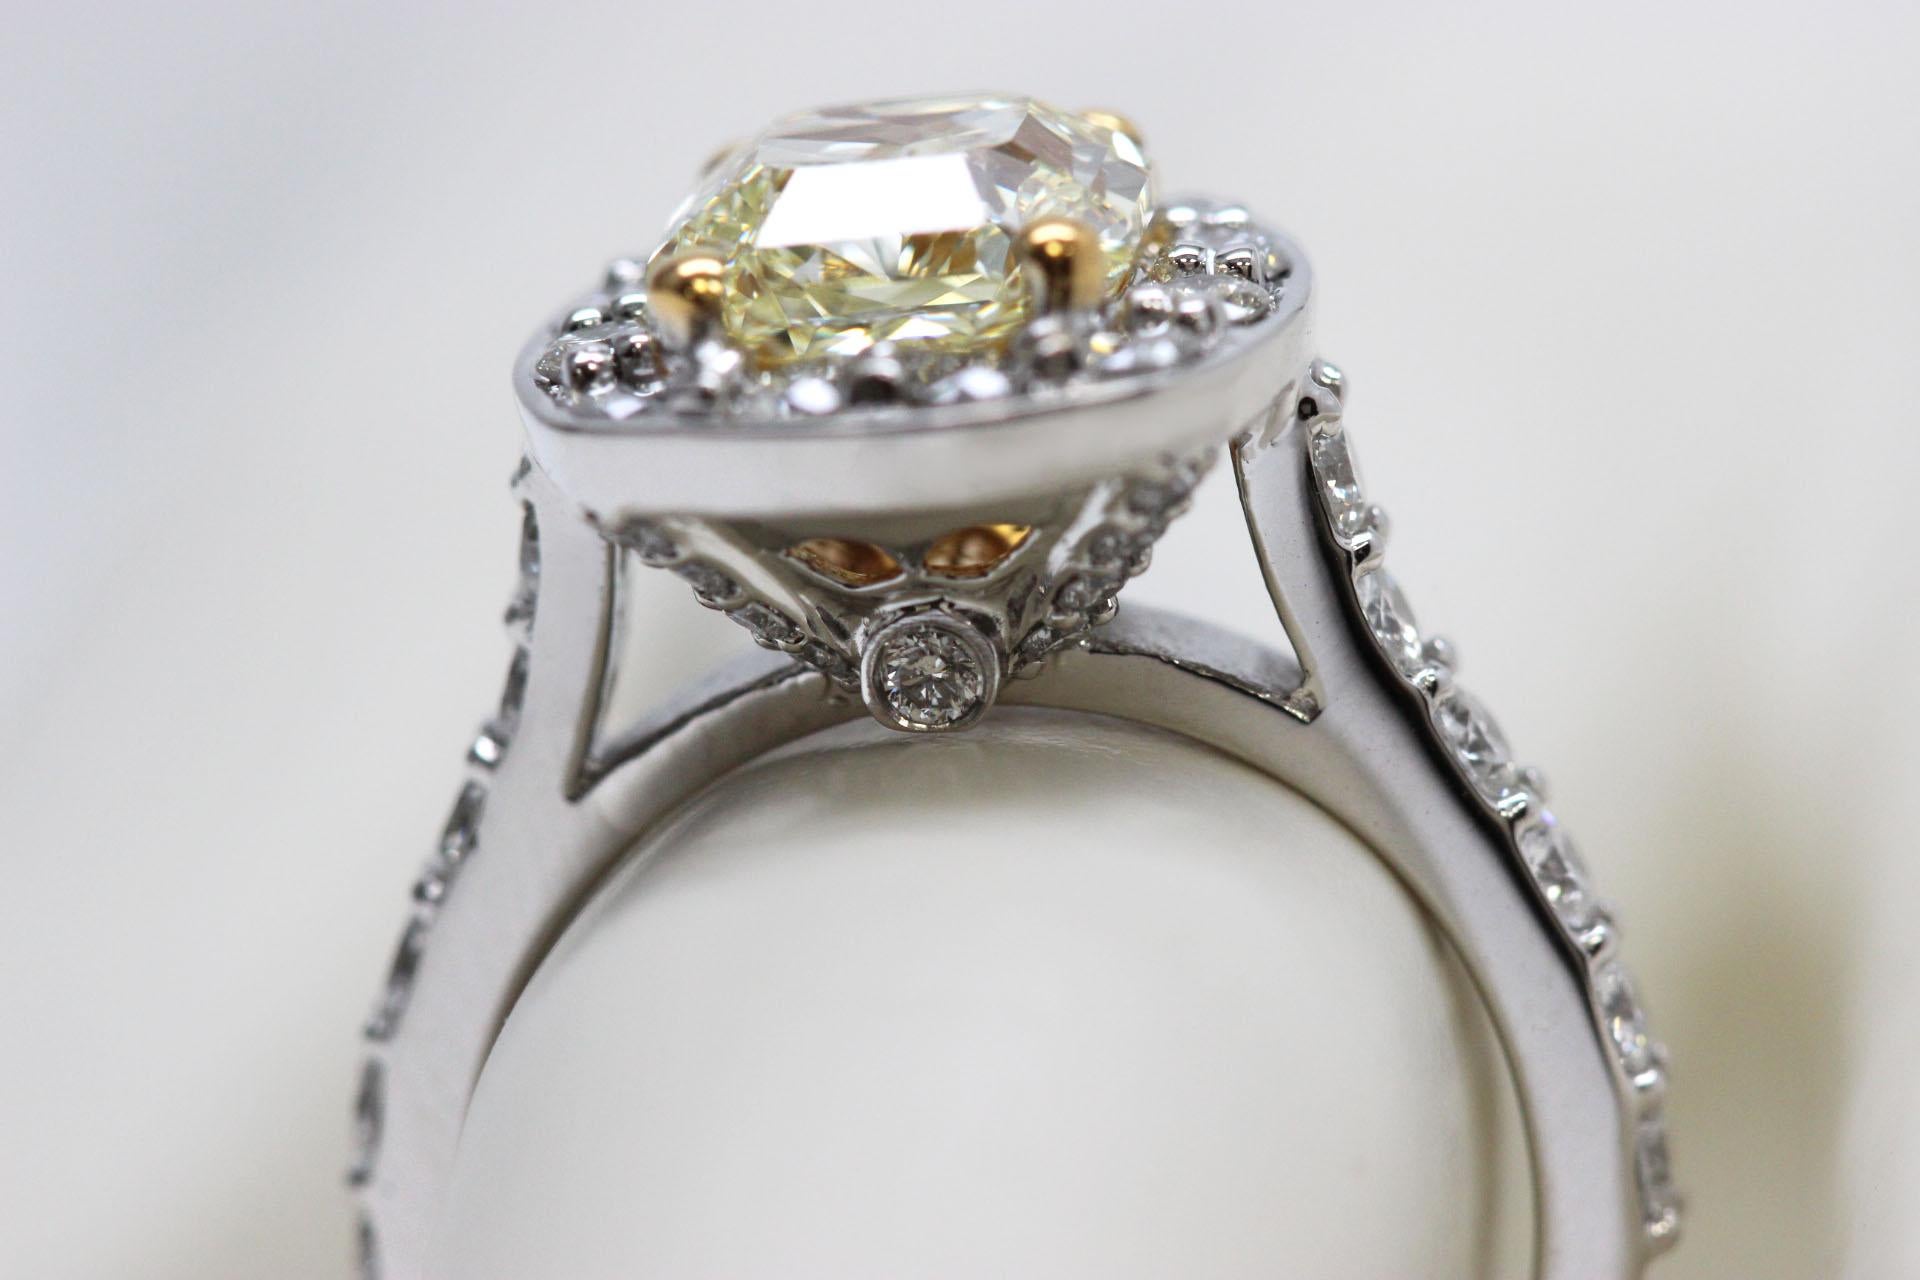 A 3-carat diamond engagement ring with a GIA-certified VVS1 fancy light yellow center stone. Radiant cut 3ct natural light yellow diamond halo engagement ring on a platinum band.

Set on a platinum band, this engagement ring from Scarselli features